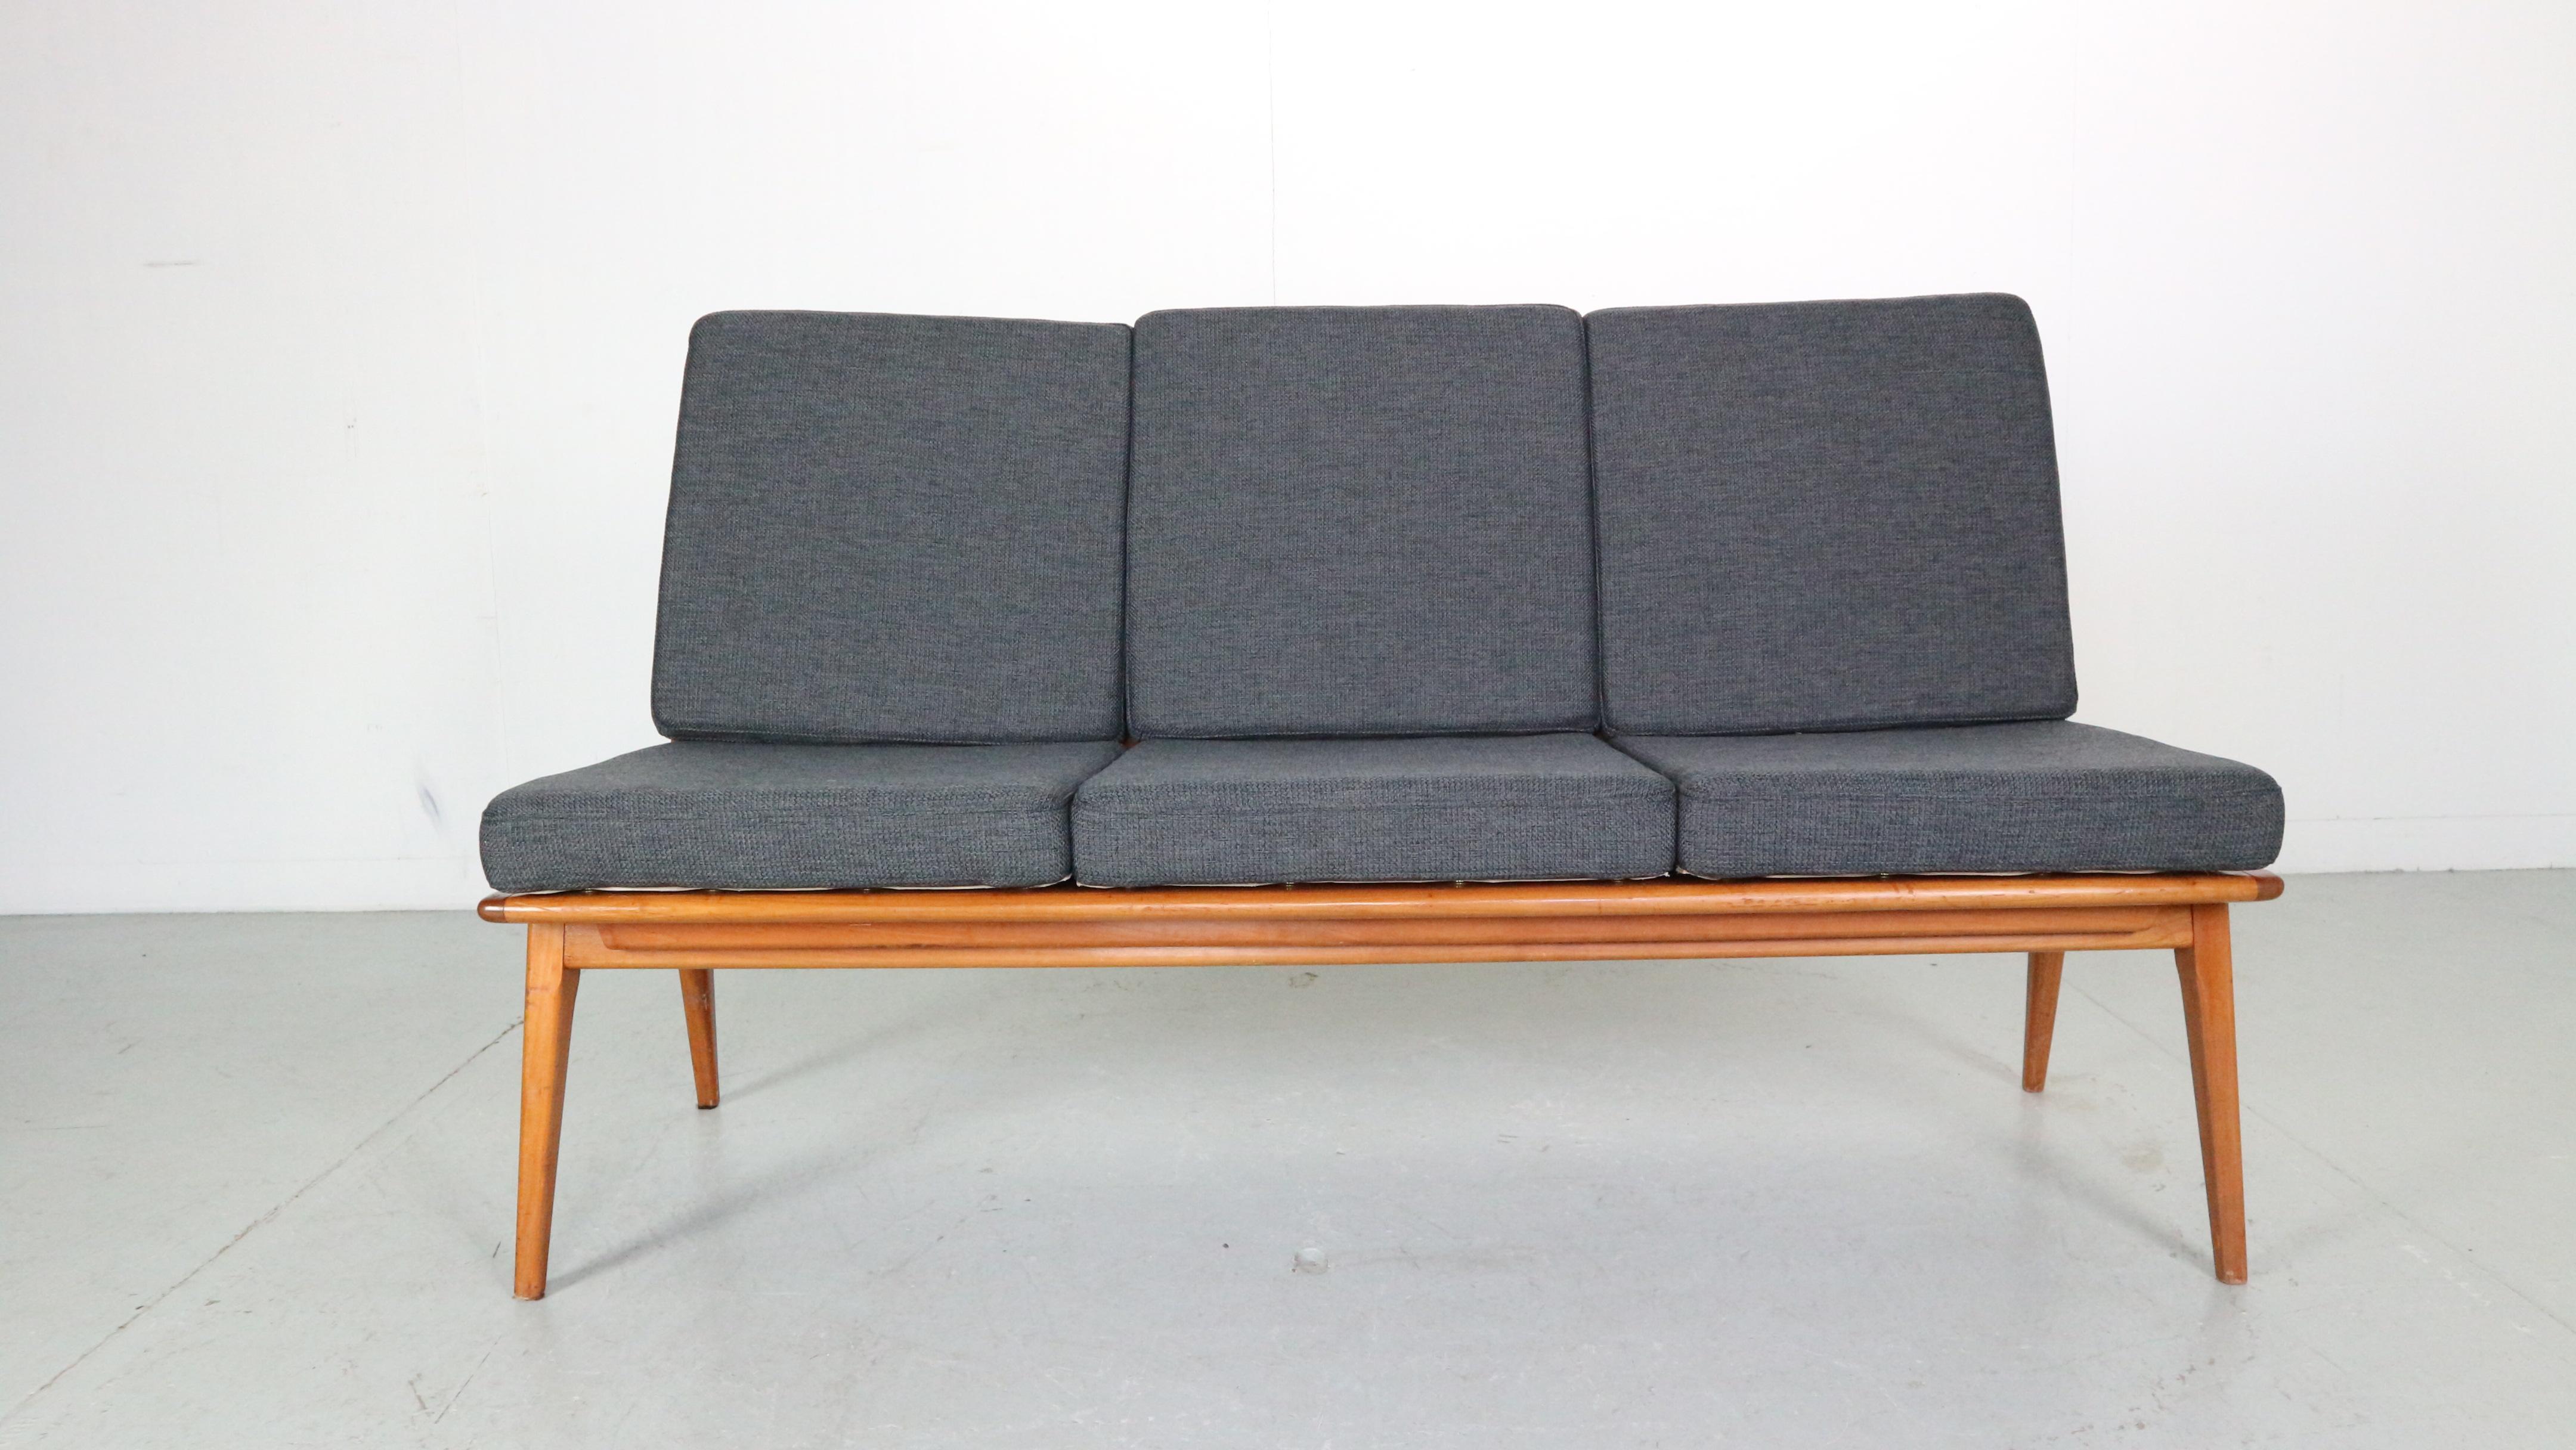 Danish style three-seater sofa designed by Hans Mitzlaff for Eugene Scmidt Soloform during the 50’s. This boomerang-shaped model brings to mind the popular designs from the likes of Alfred Christensen.

The sofa features a stylish 1950s design,